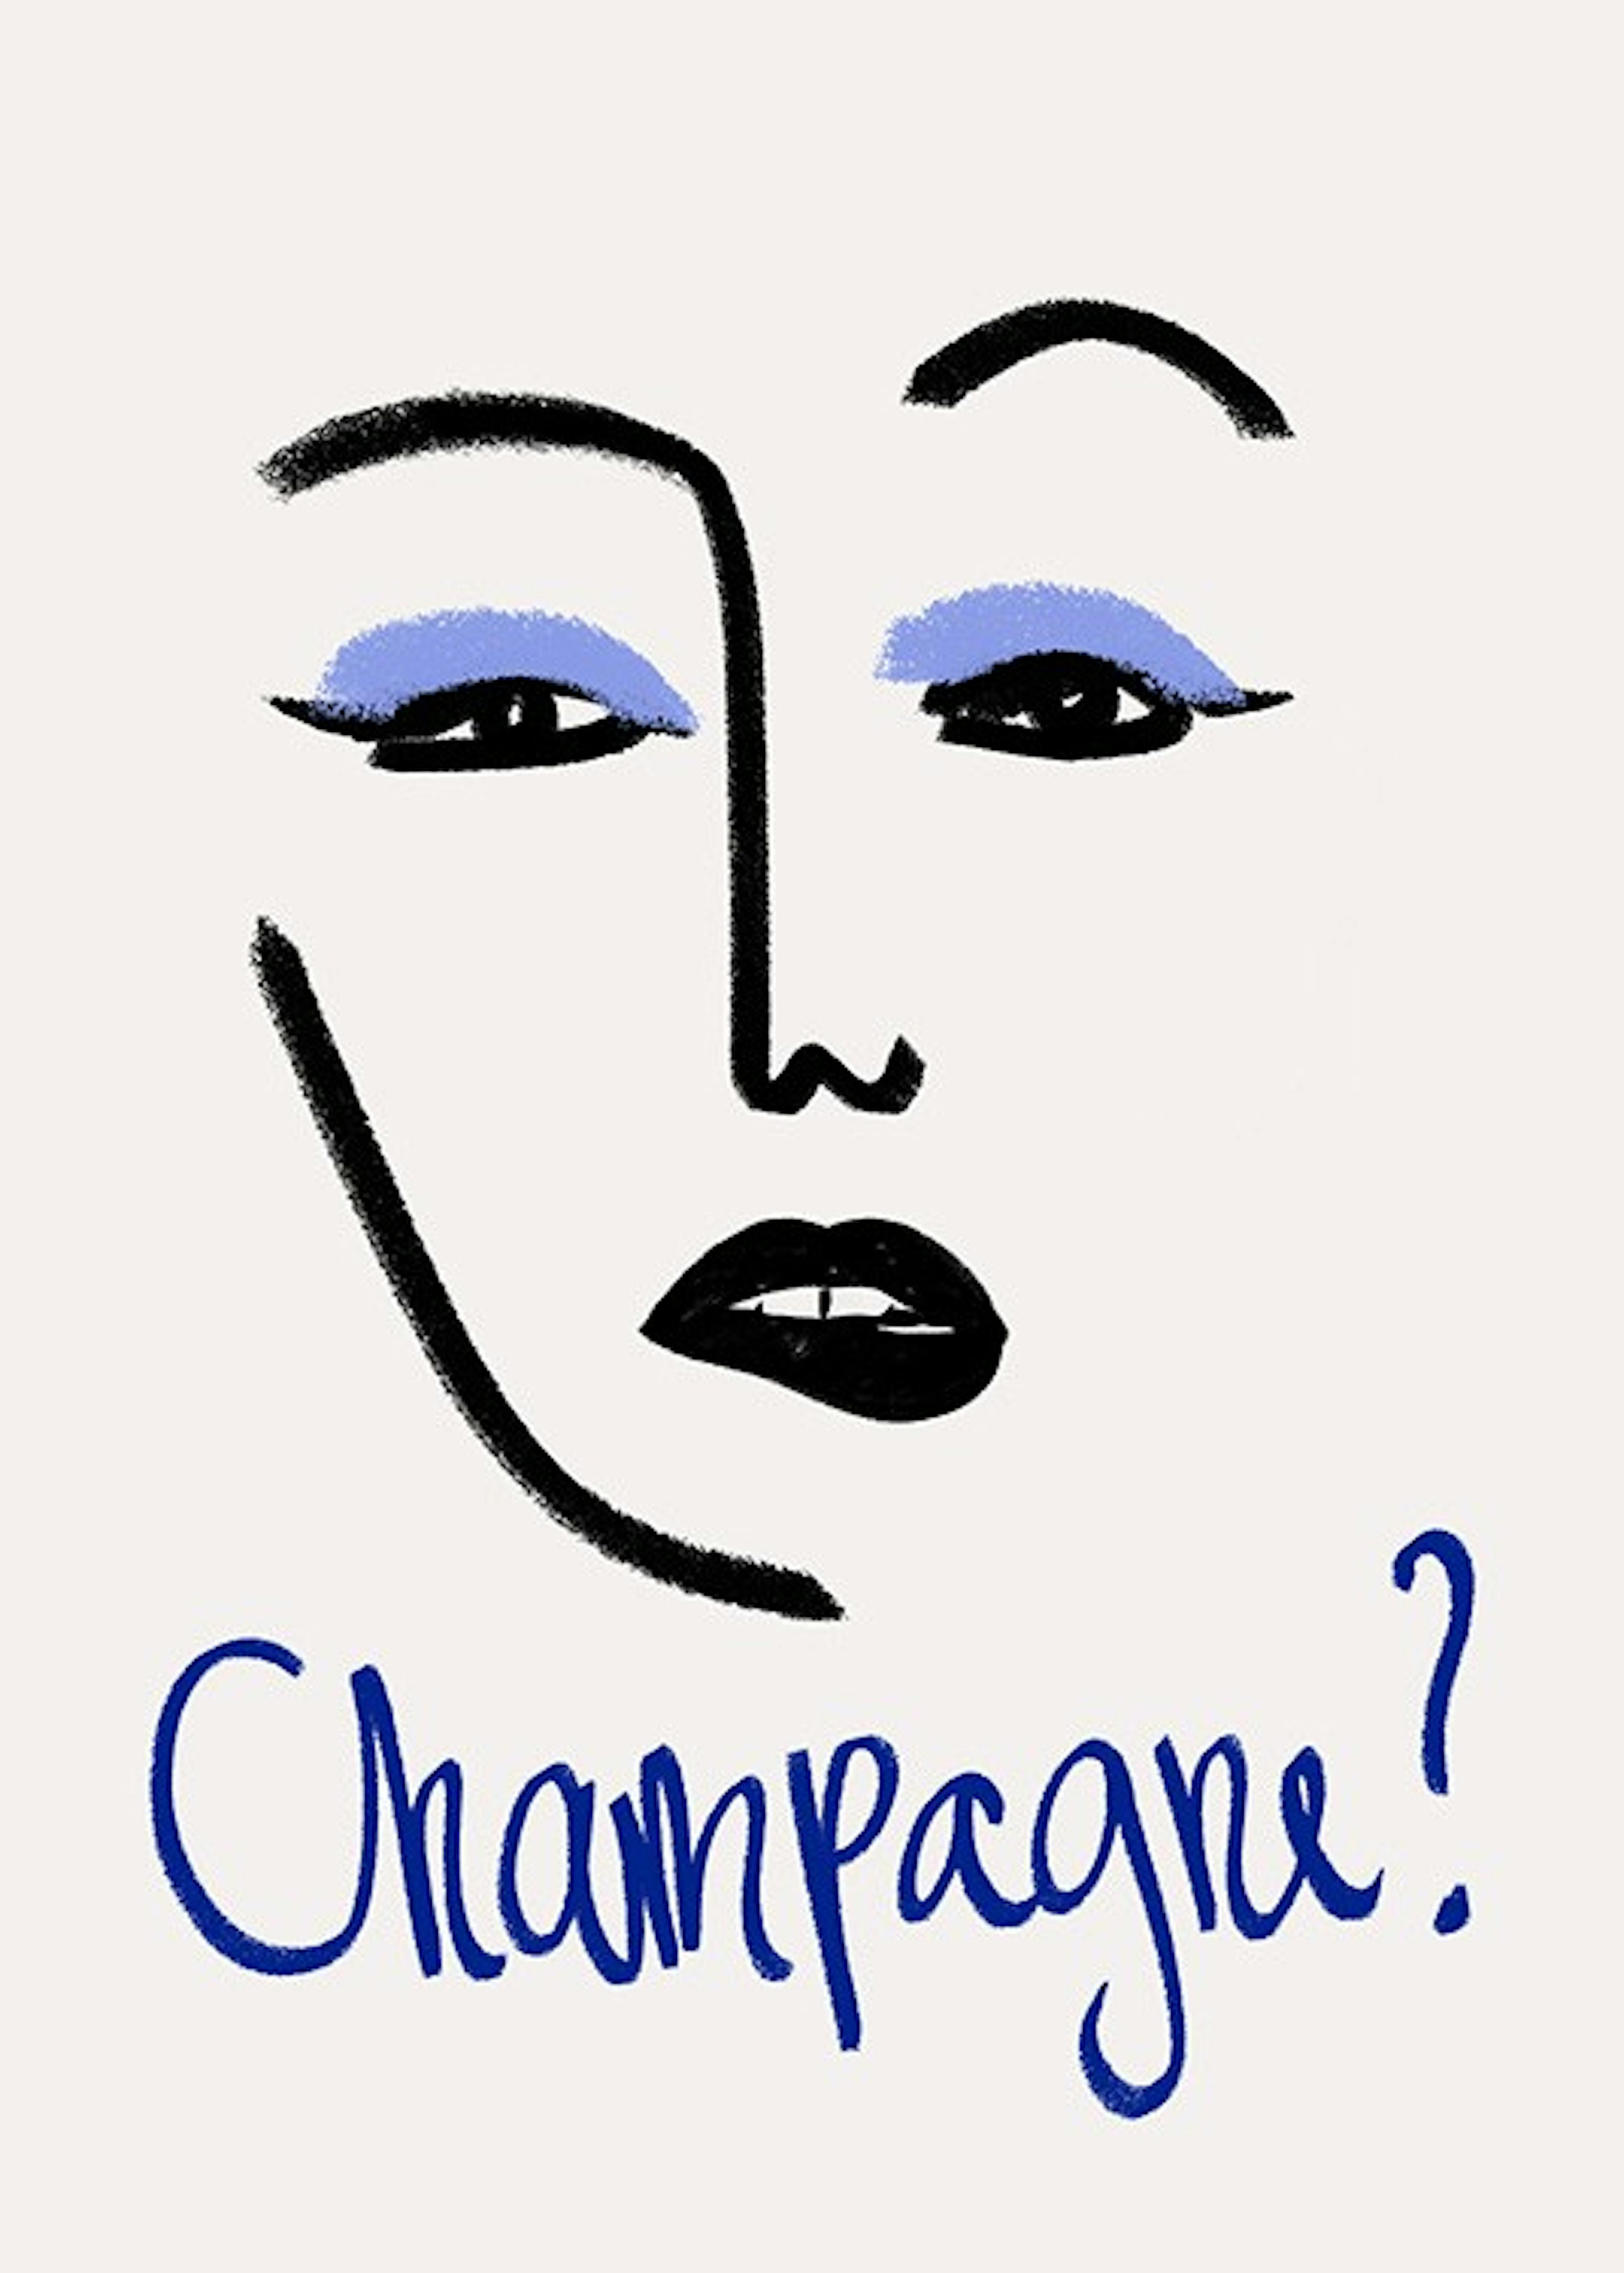 Champagne Thoughts Print 0